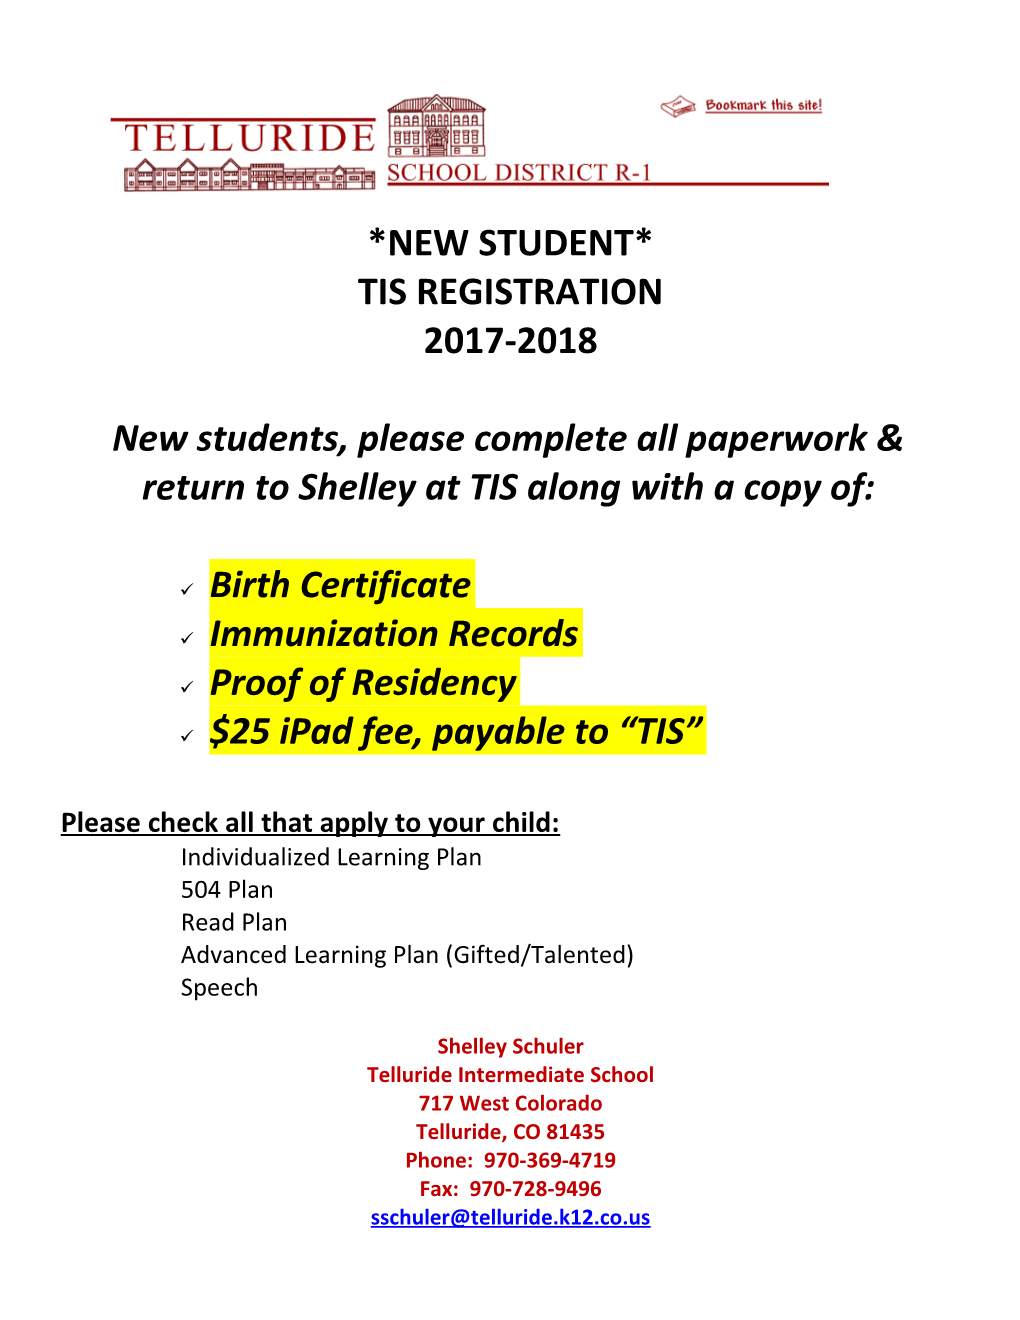 New Students, Please Complete All Paperwork & Return to Shelley at TIS Along with a Copy Of